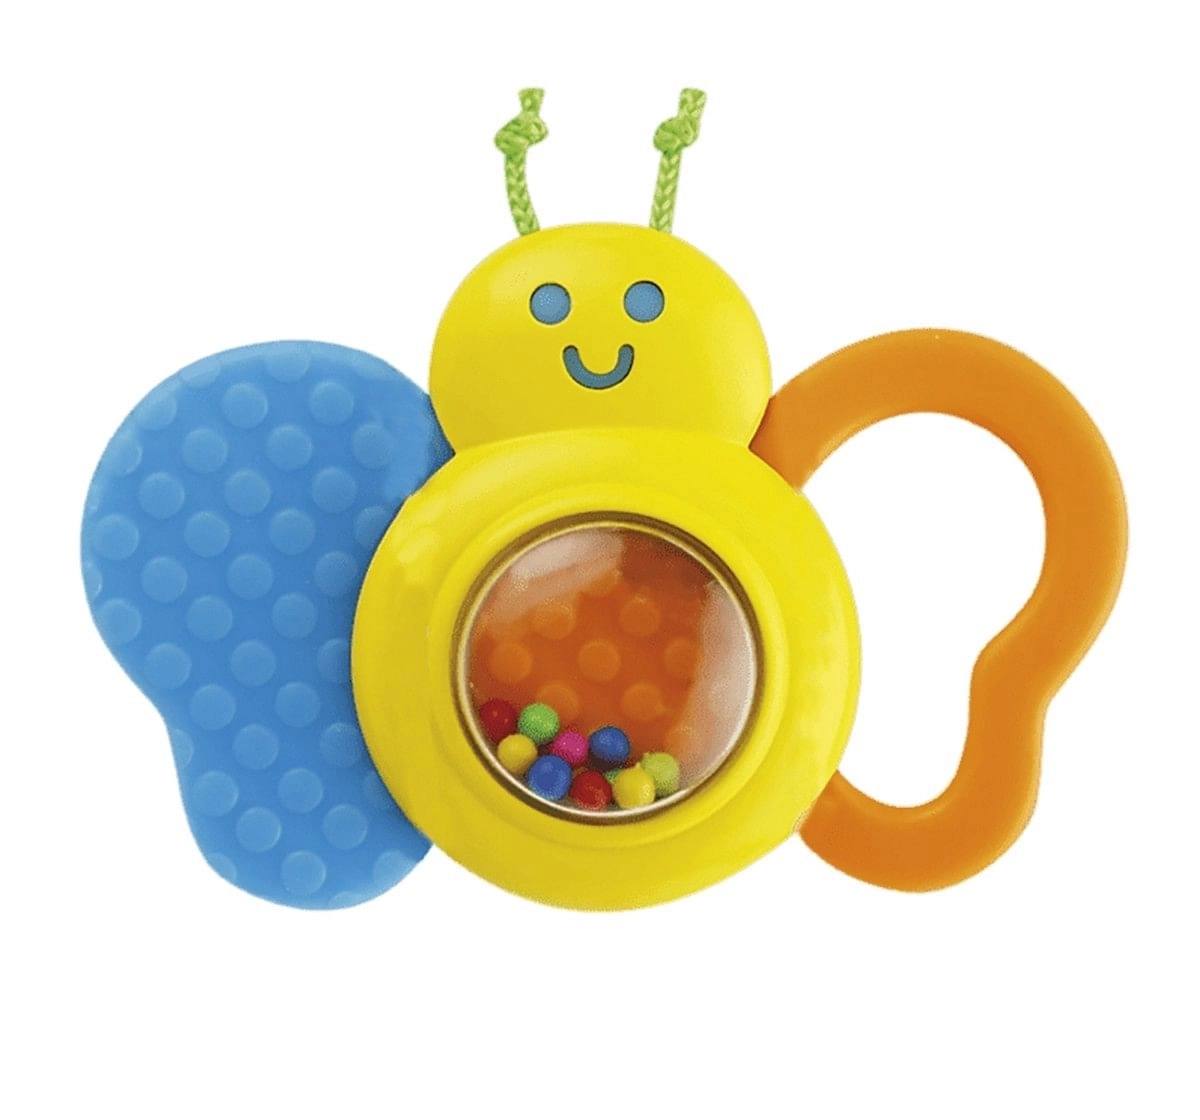 Winfun baby's butterfly rattle New Born for Kids age 0M+ 